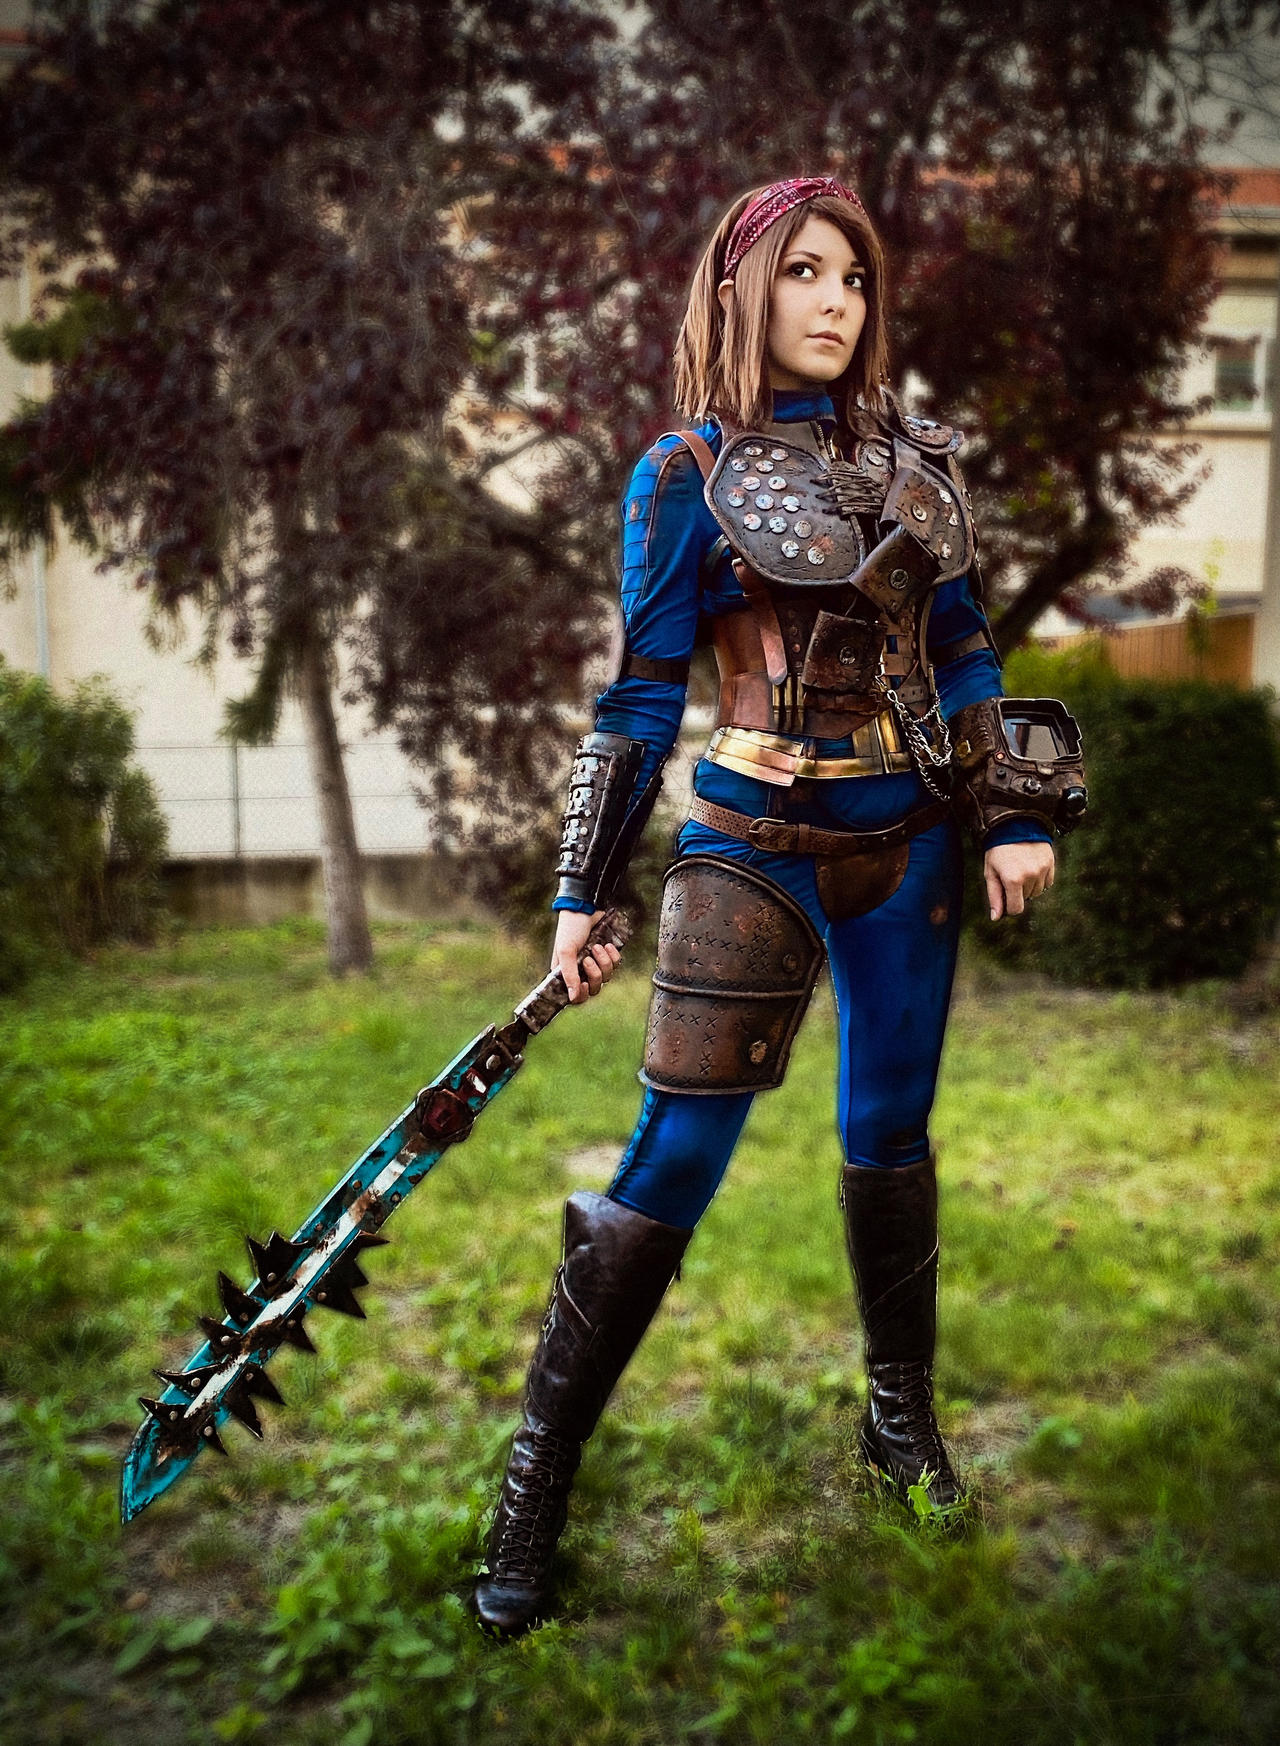 Leather Armor from Fallout 76 by Dragunova-Cosplay on DeviantArt